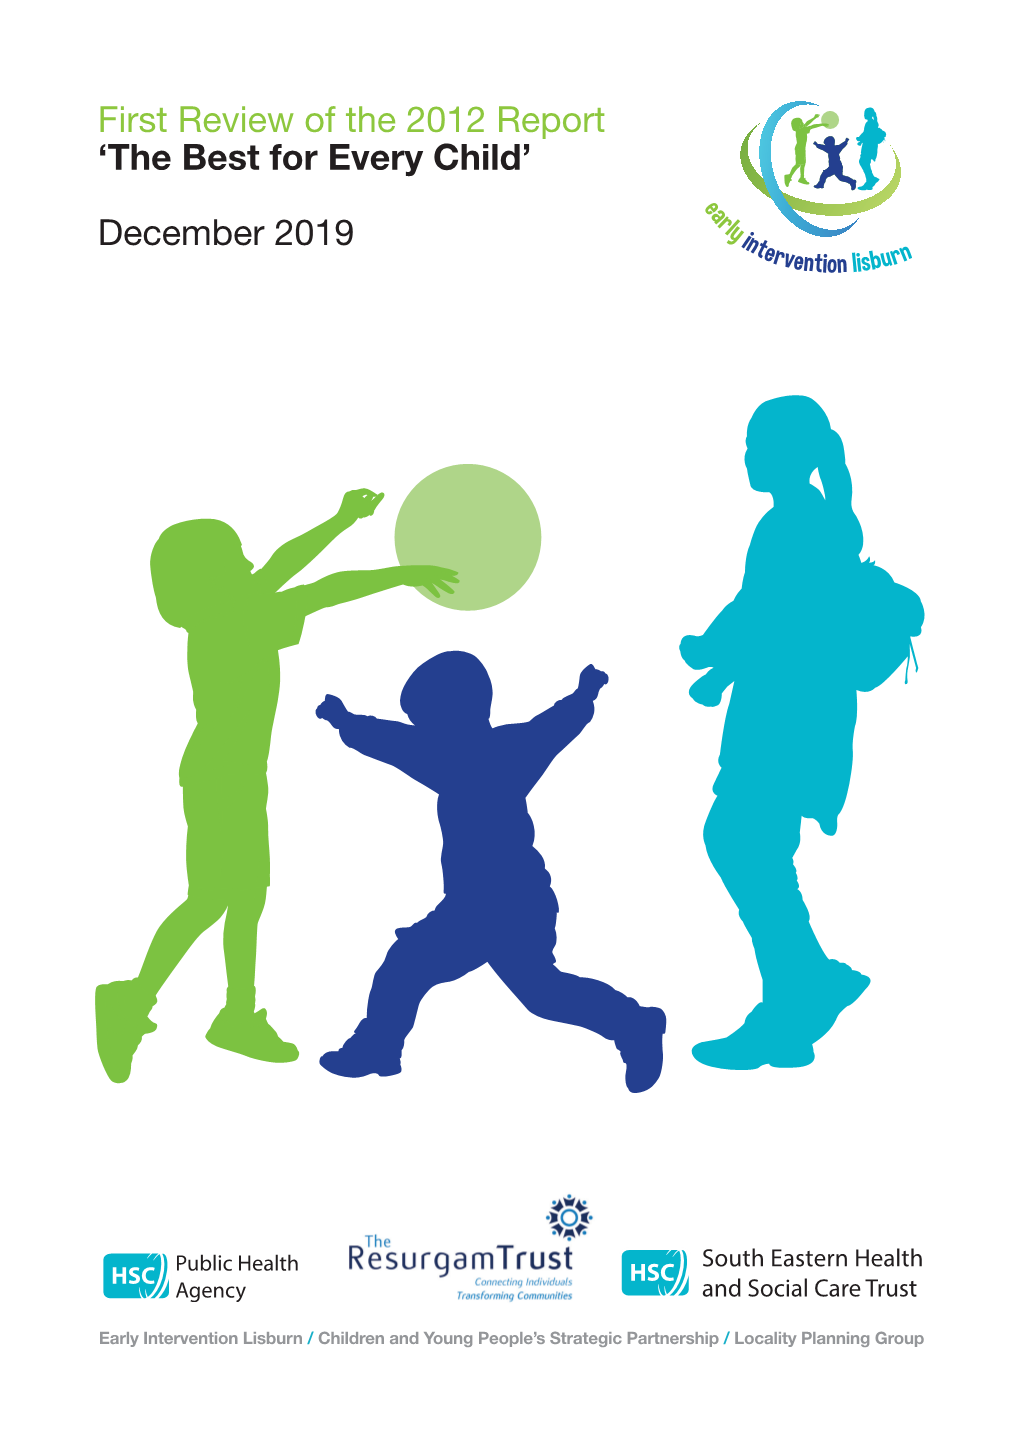 First Review of the 2012 Report 'The Best for Every Child' December 2019